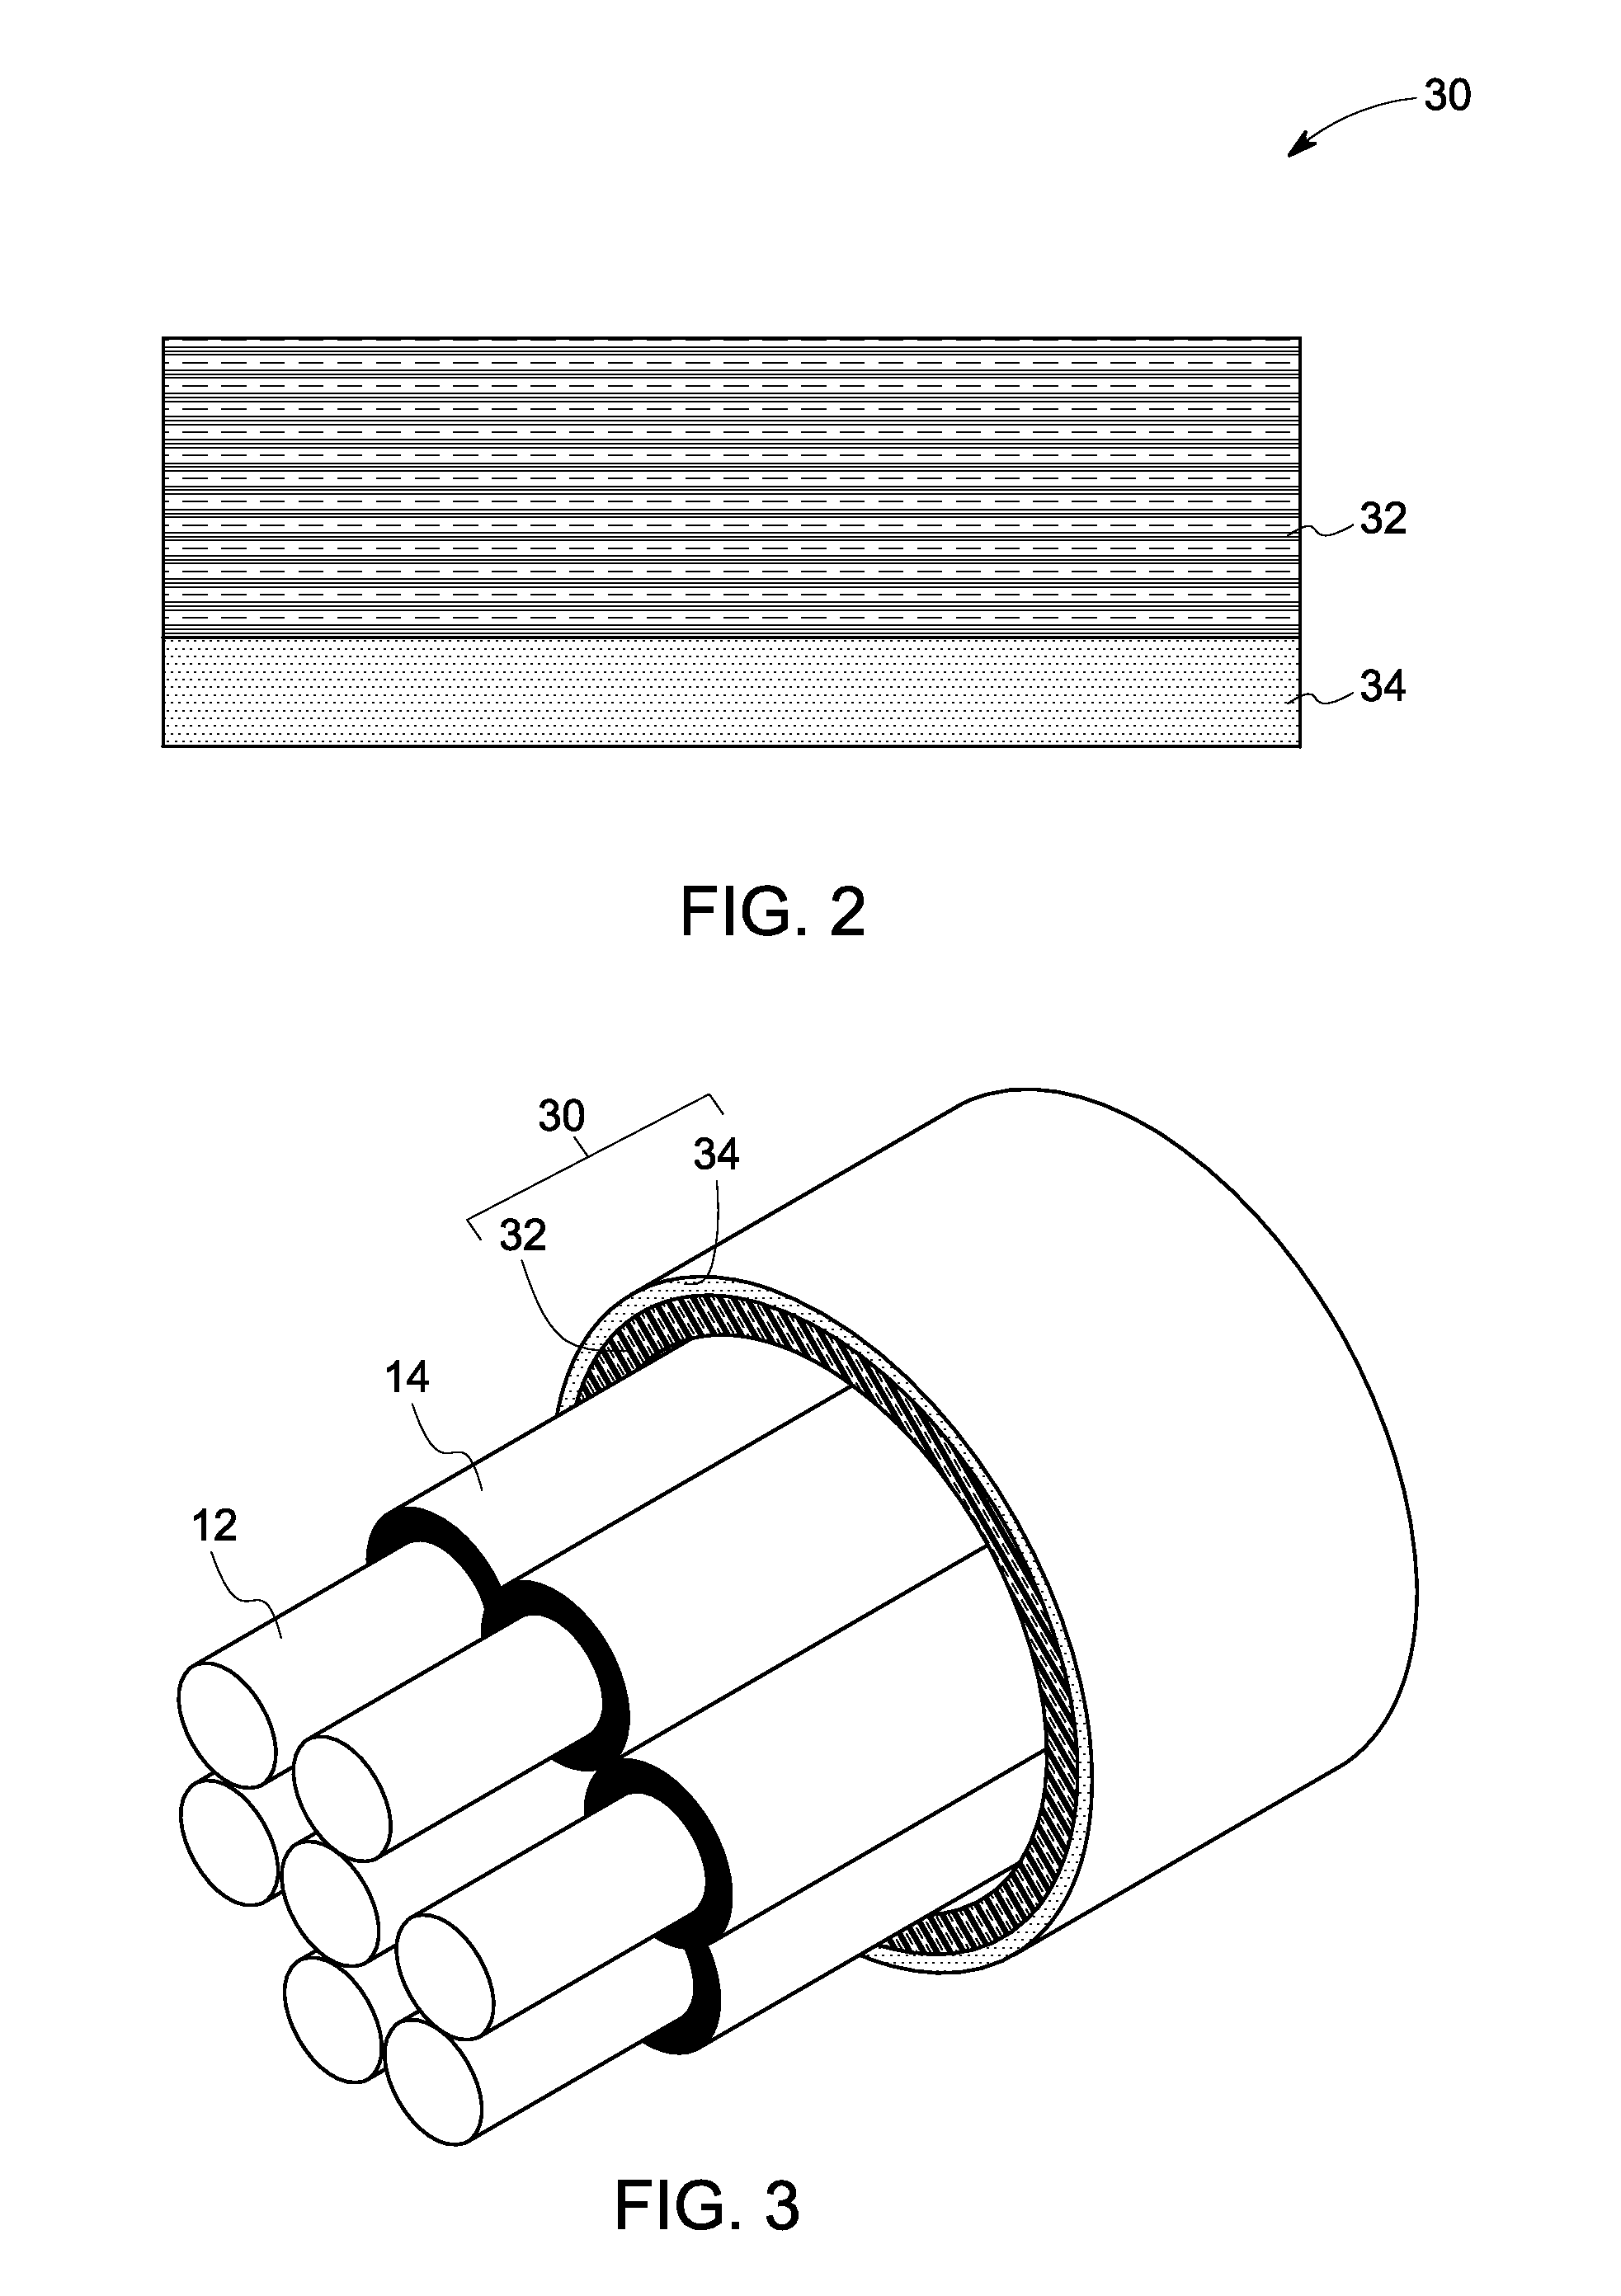 Electrical insulation system